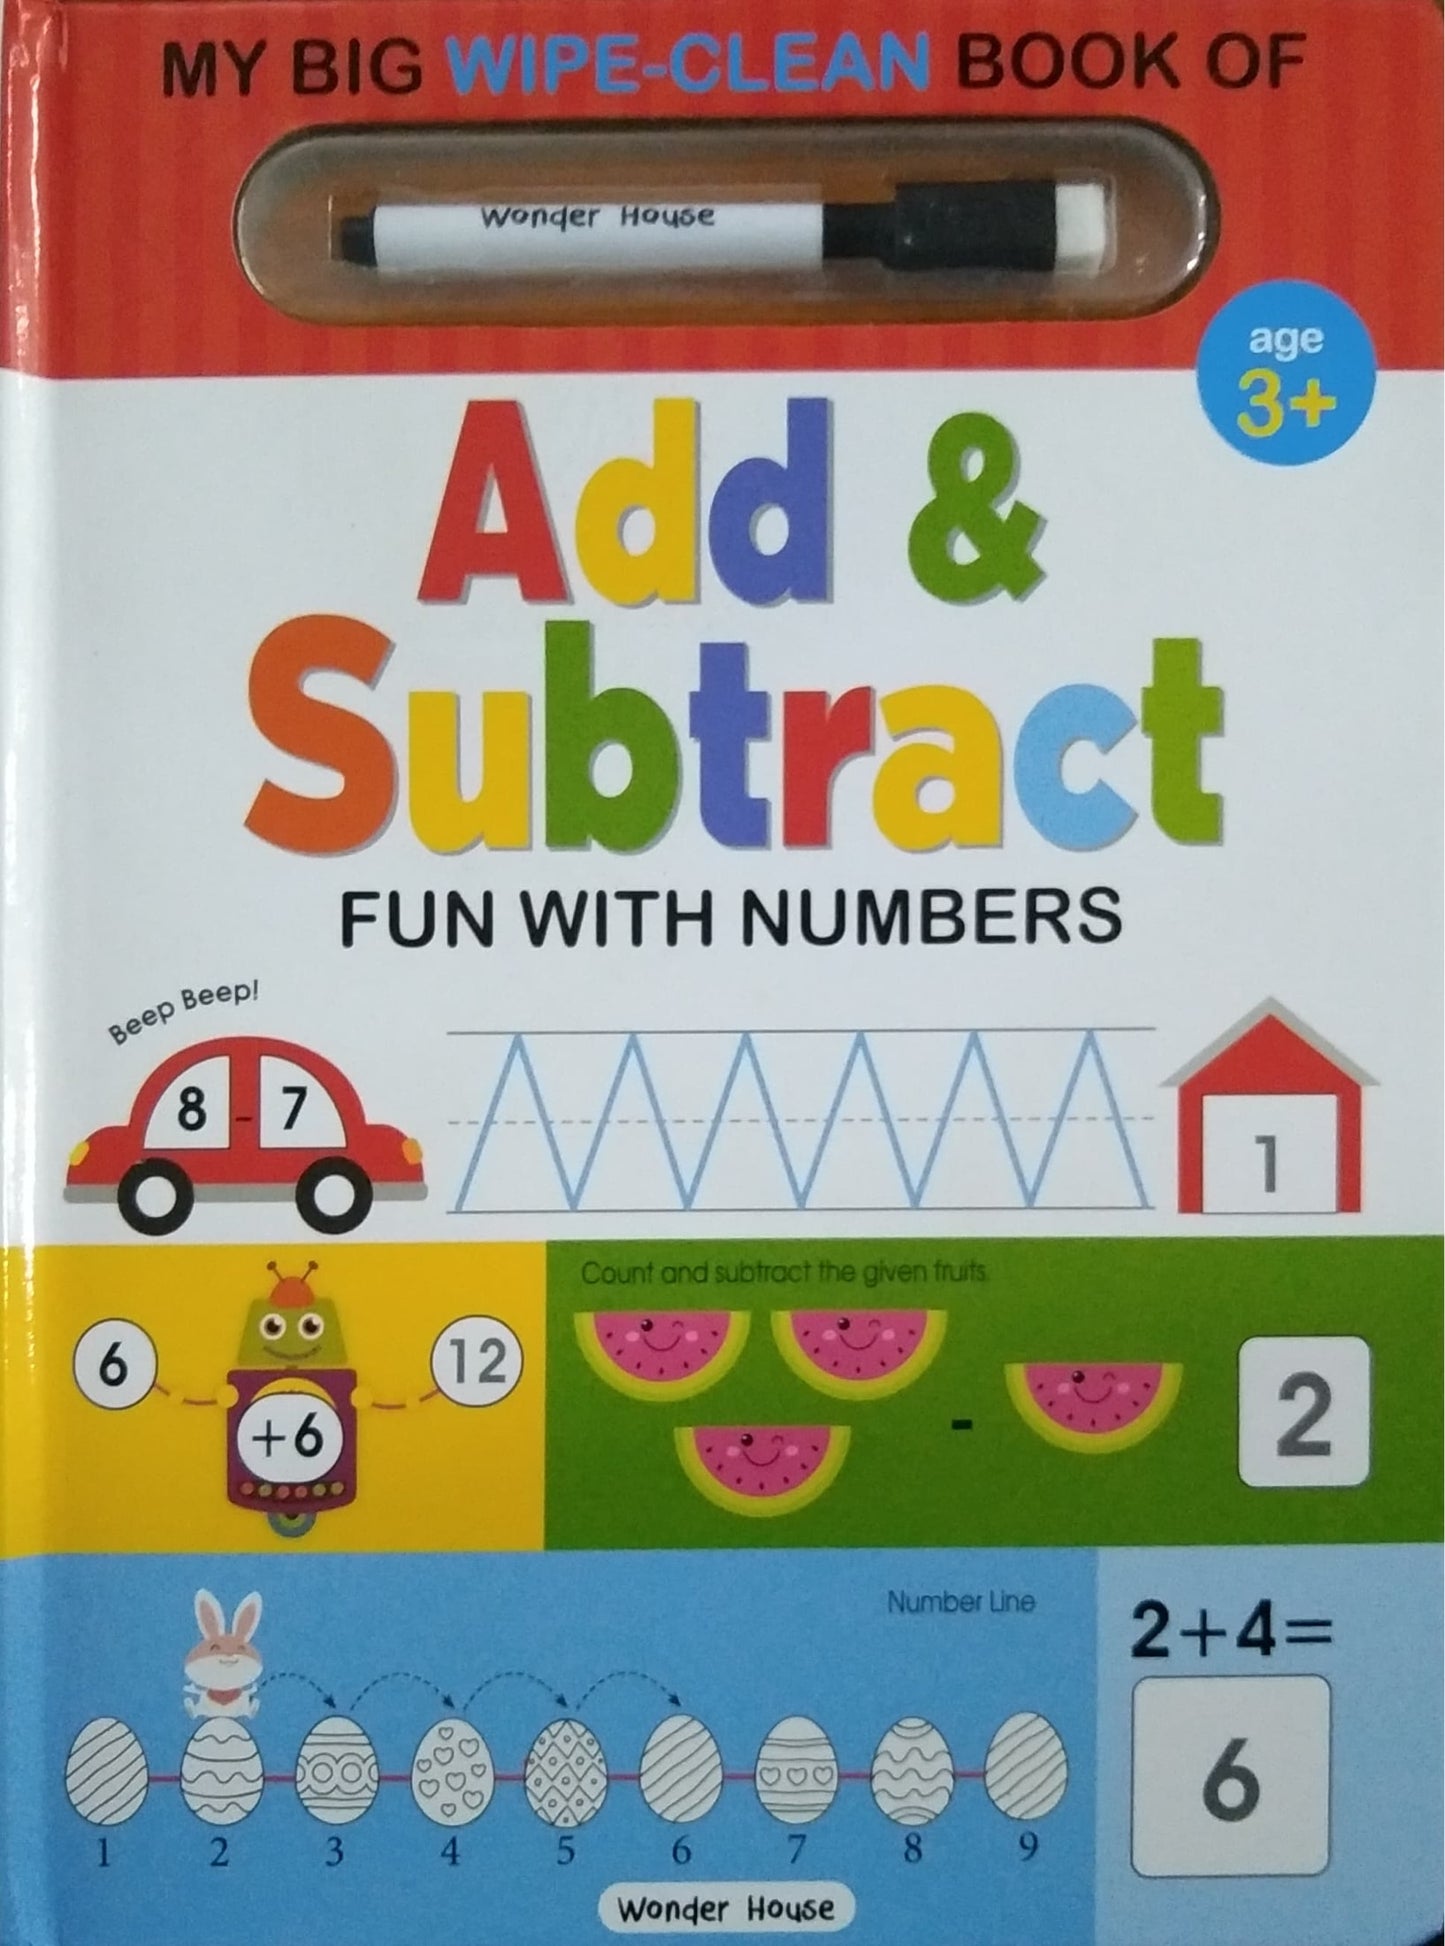 Add & Subtract - FUN WITH NUMBERS